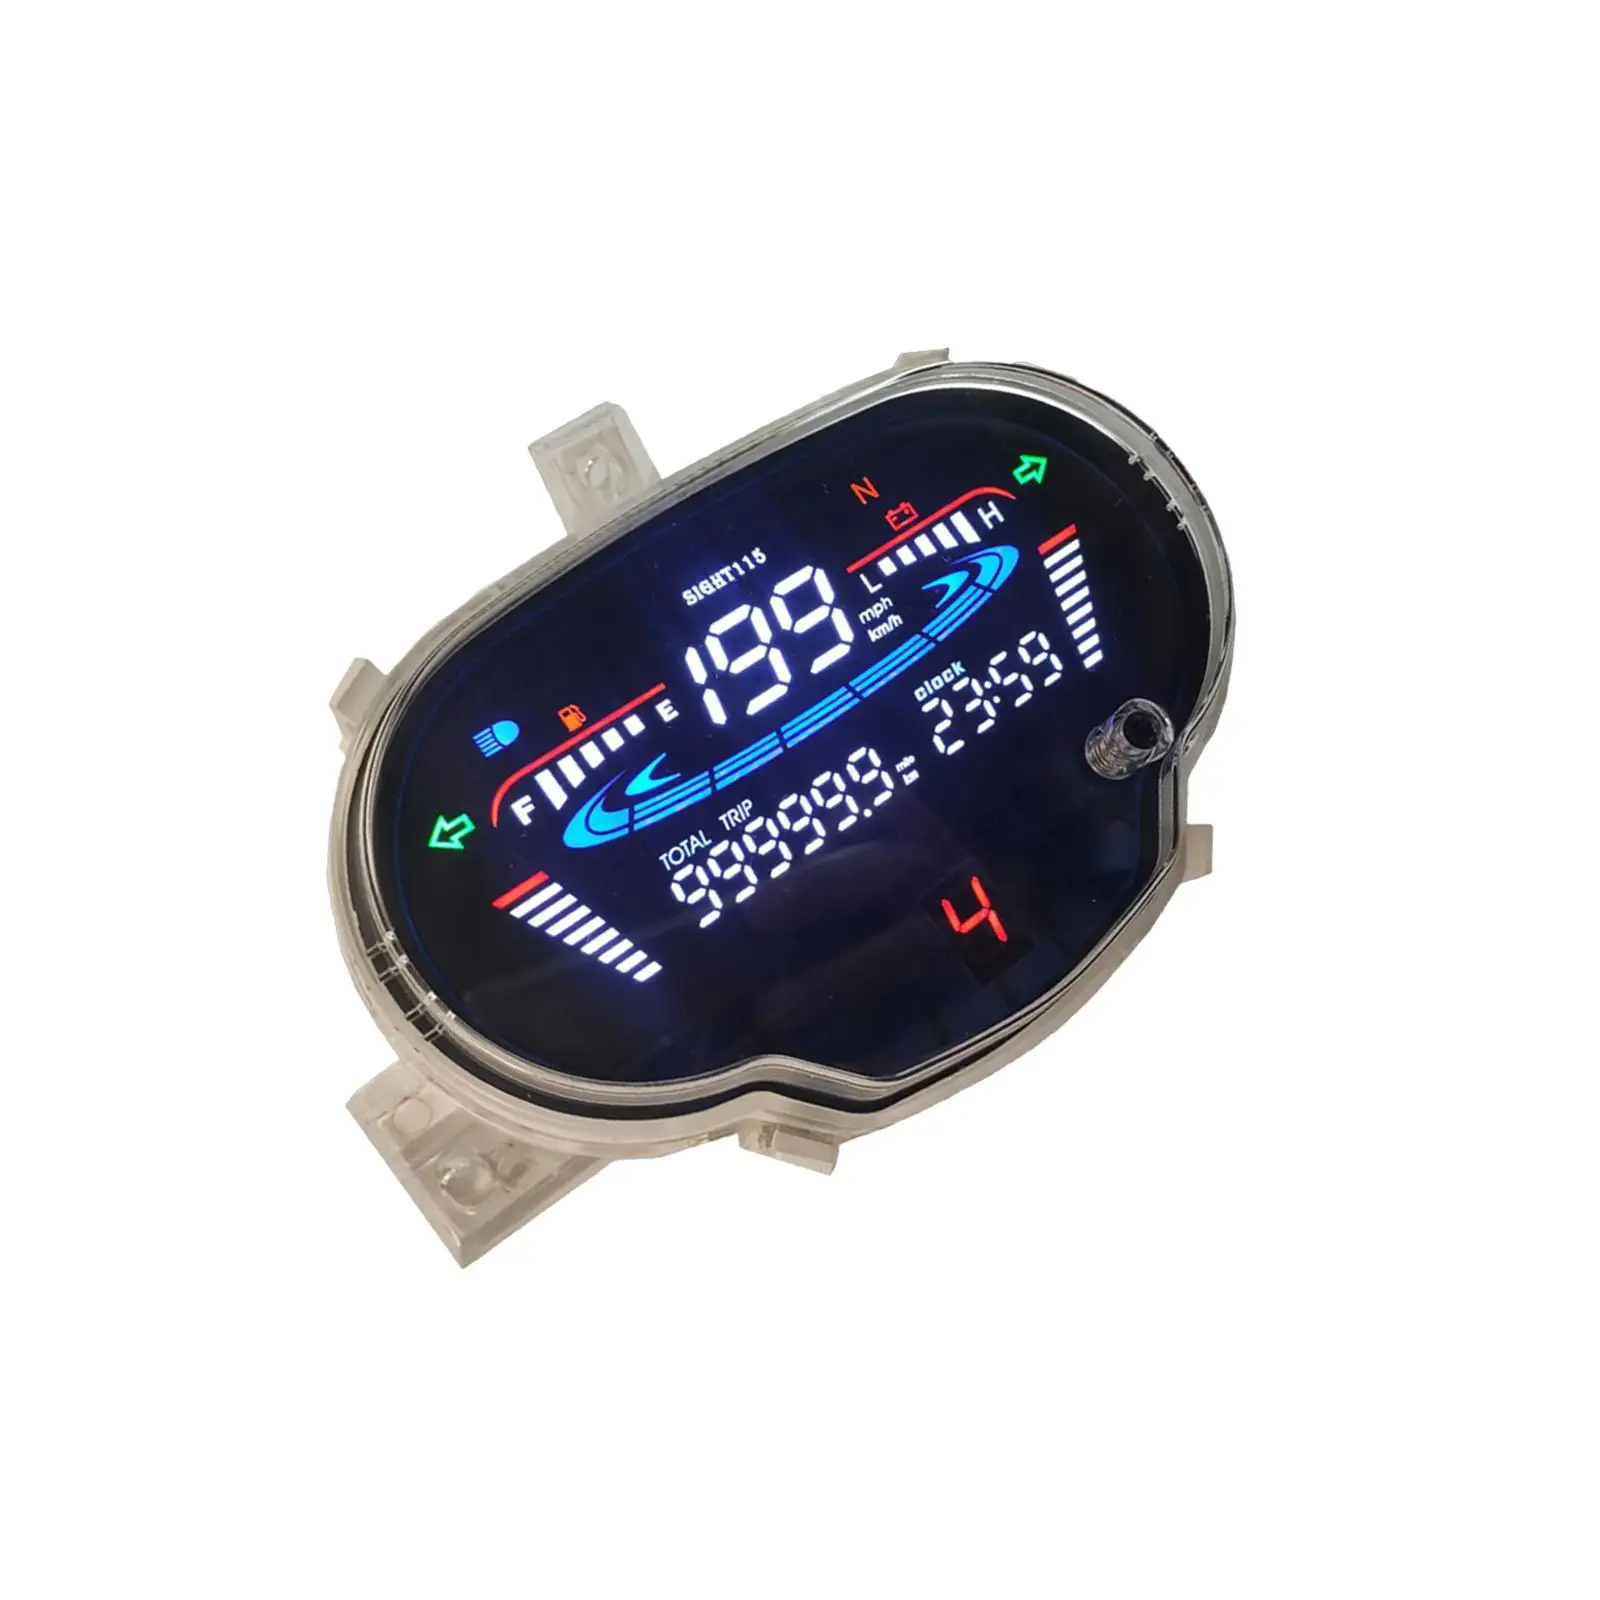 LED Digital Speedometer Odometer for Yamaha Sight 115 Accessories